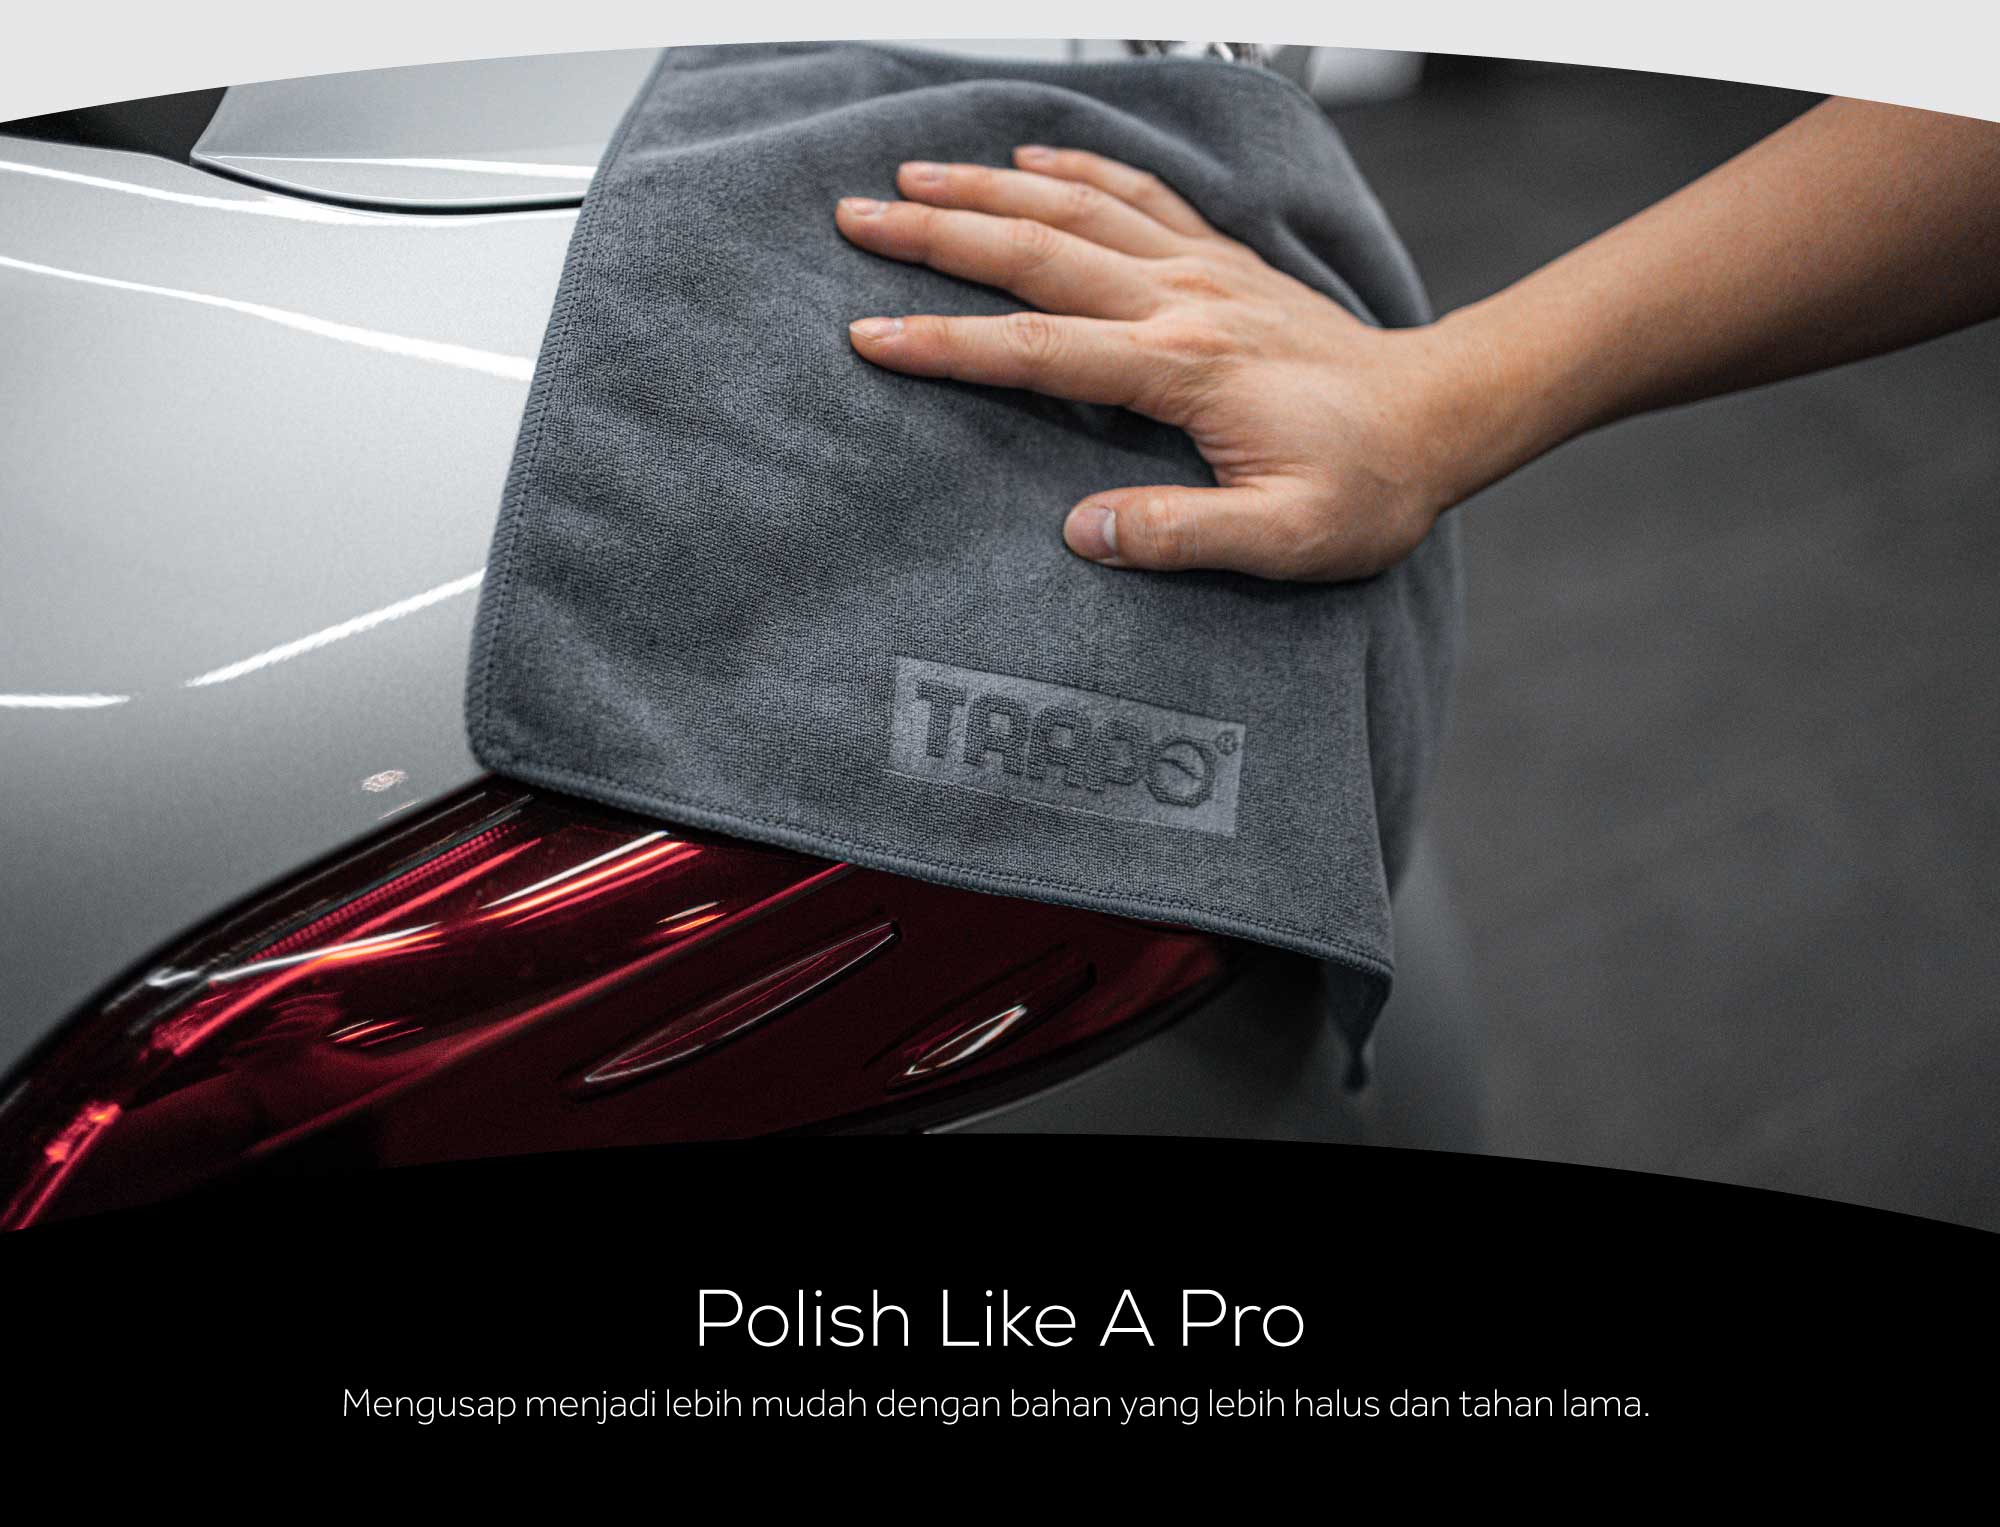 Polish Like a Pro Buffing is made easy with its incredibly durable and non-abrasive material.